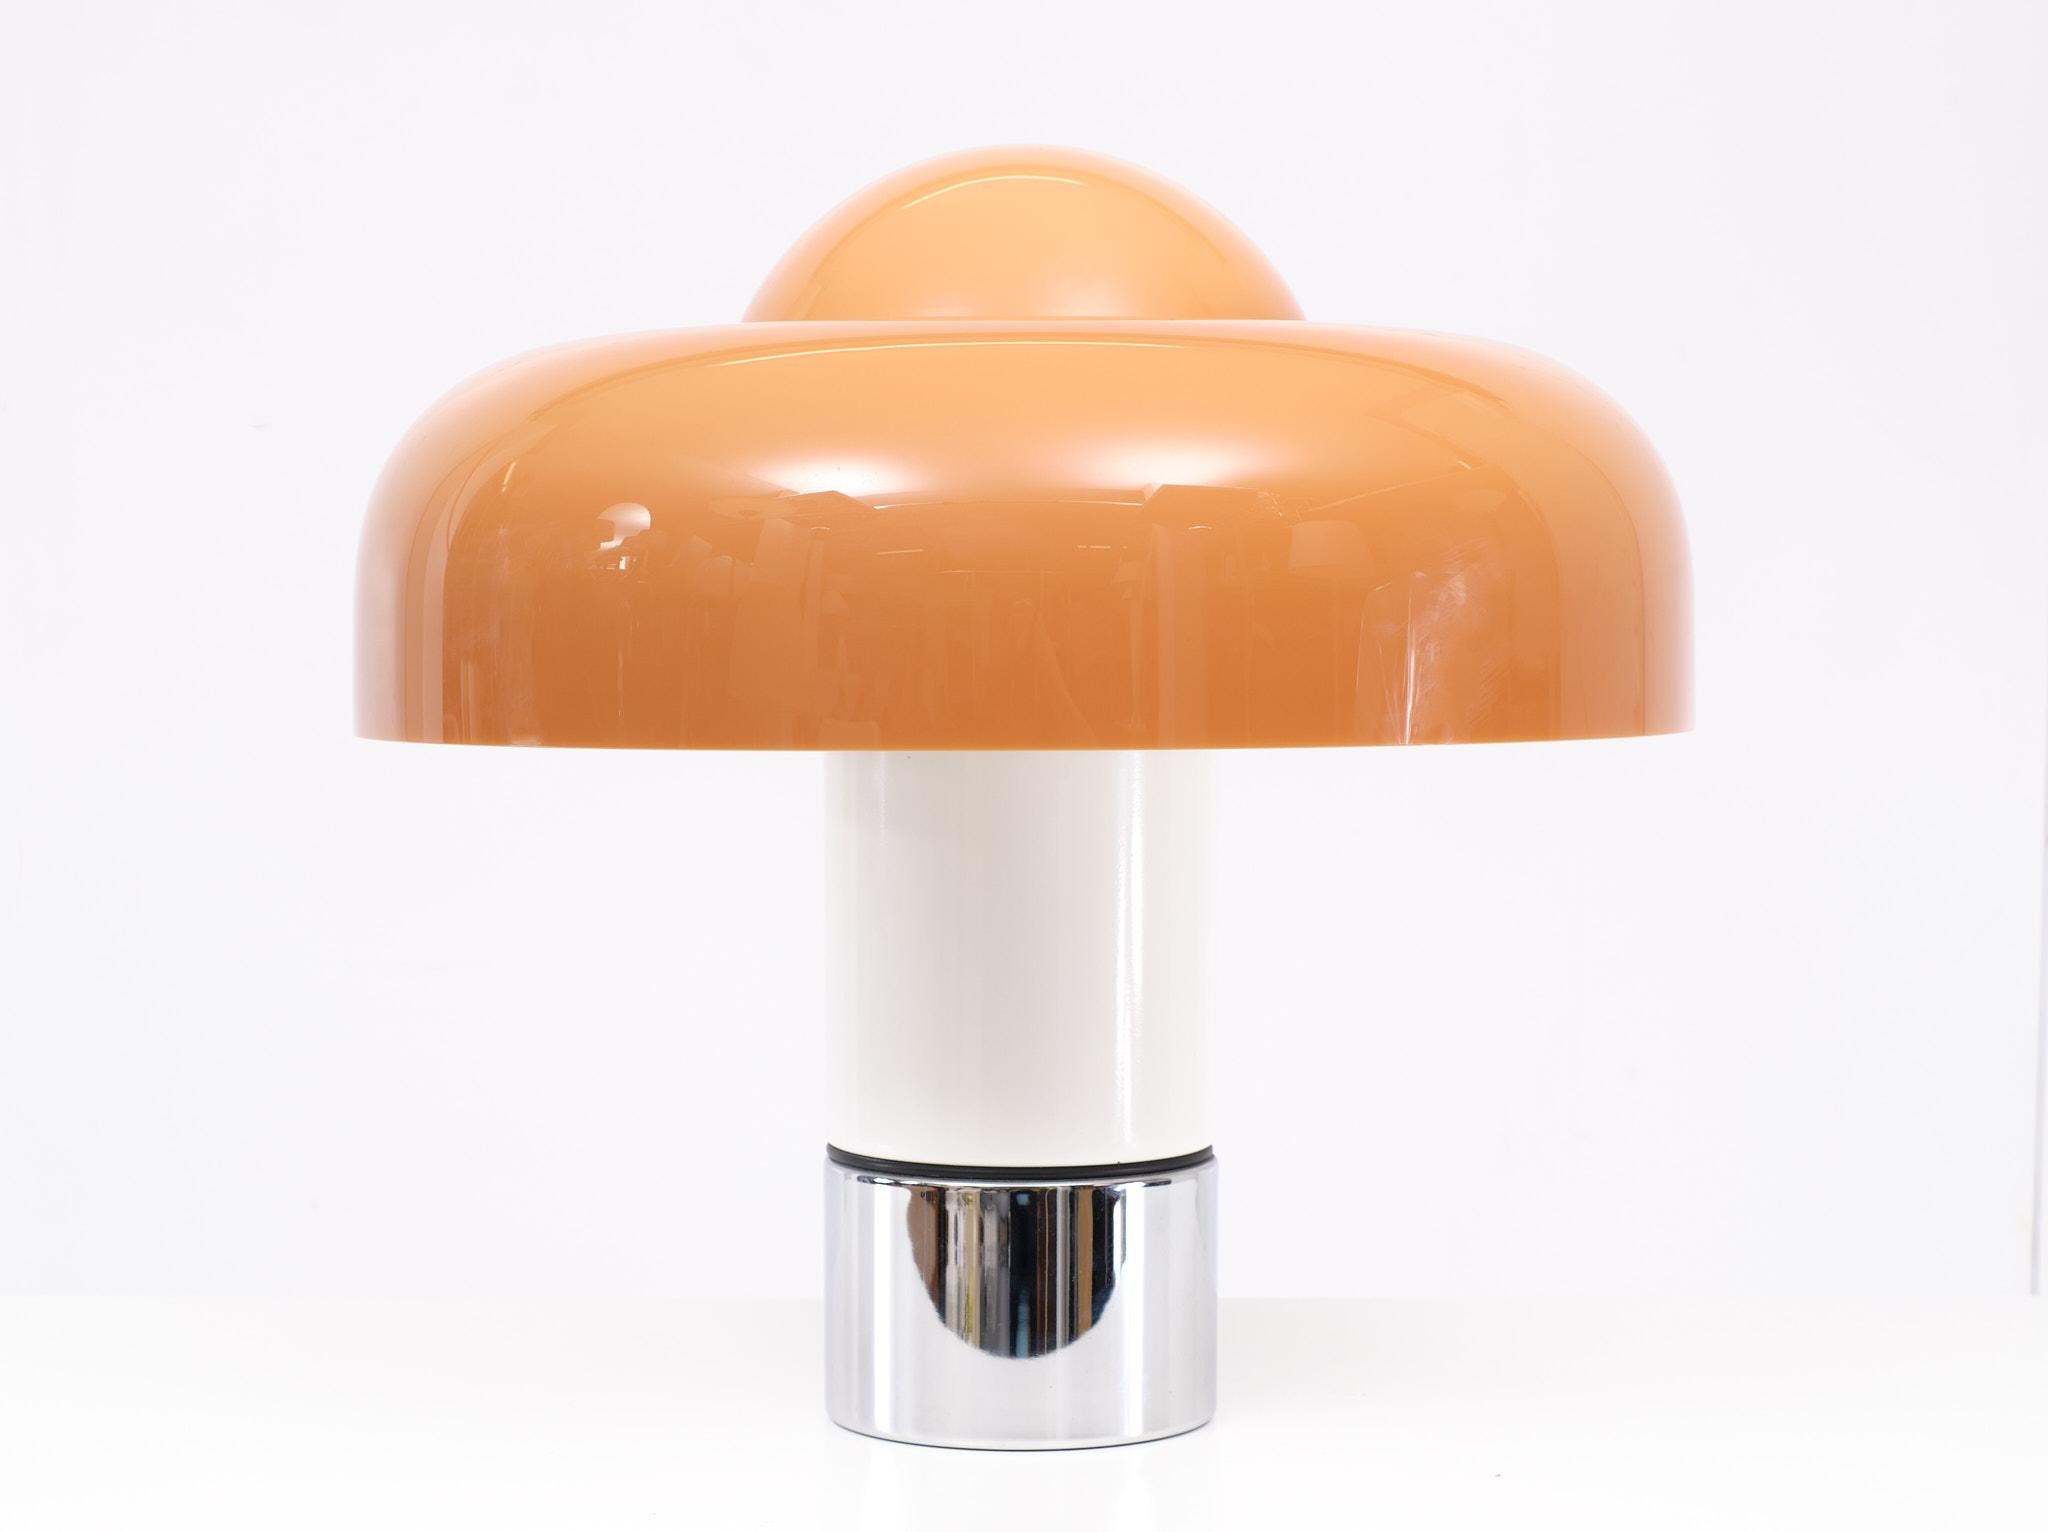 Design classic  table lamp .in a Beautiful Caramel color .This Brumbry (Brumbury) table lamp was designed in 1969 by Luigi Massoni. The lamp has a Perspex dome in Caramel , a white inside chromed steel foot and a white lacquered aluminum base. The